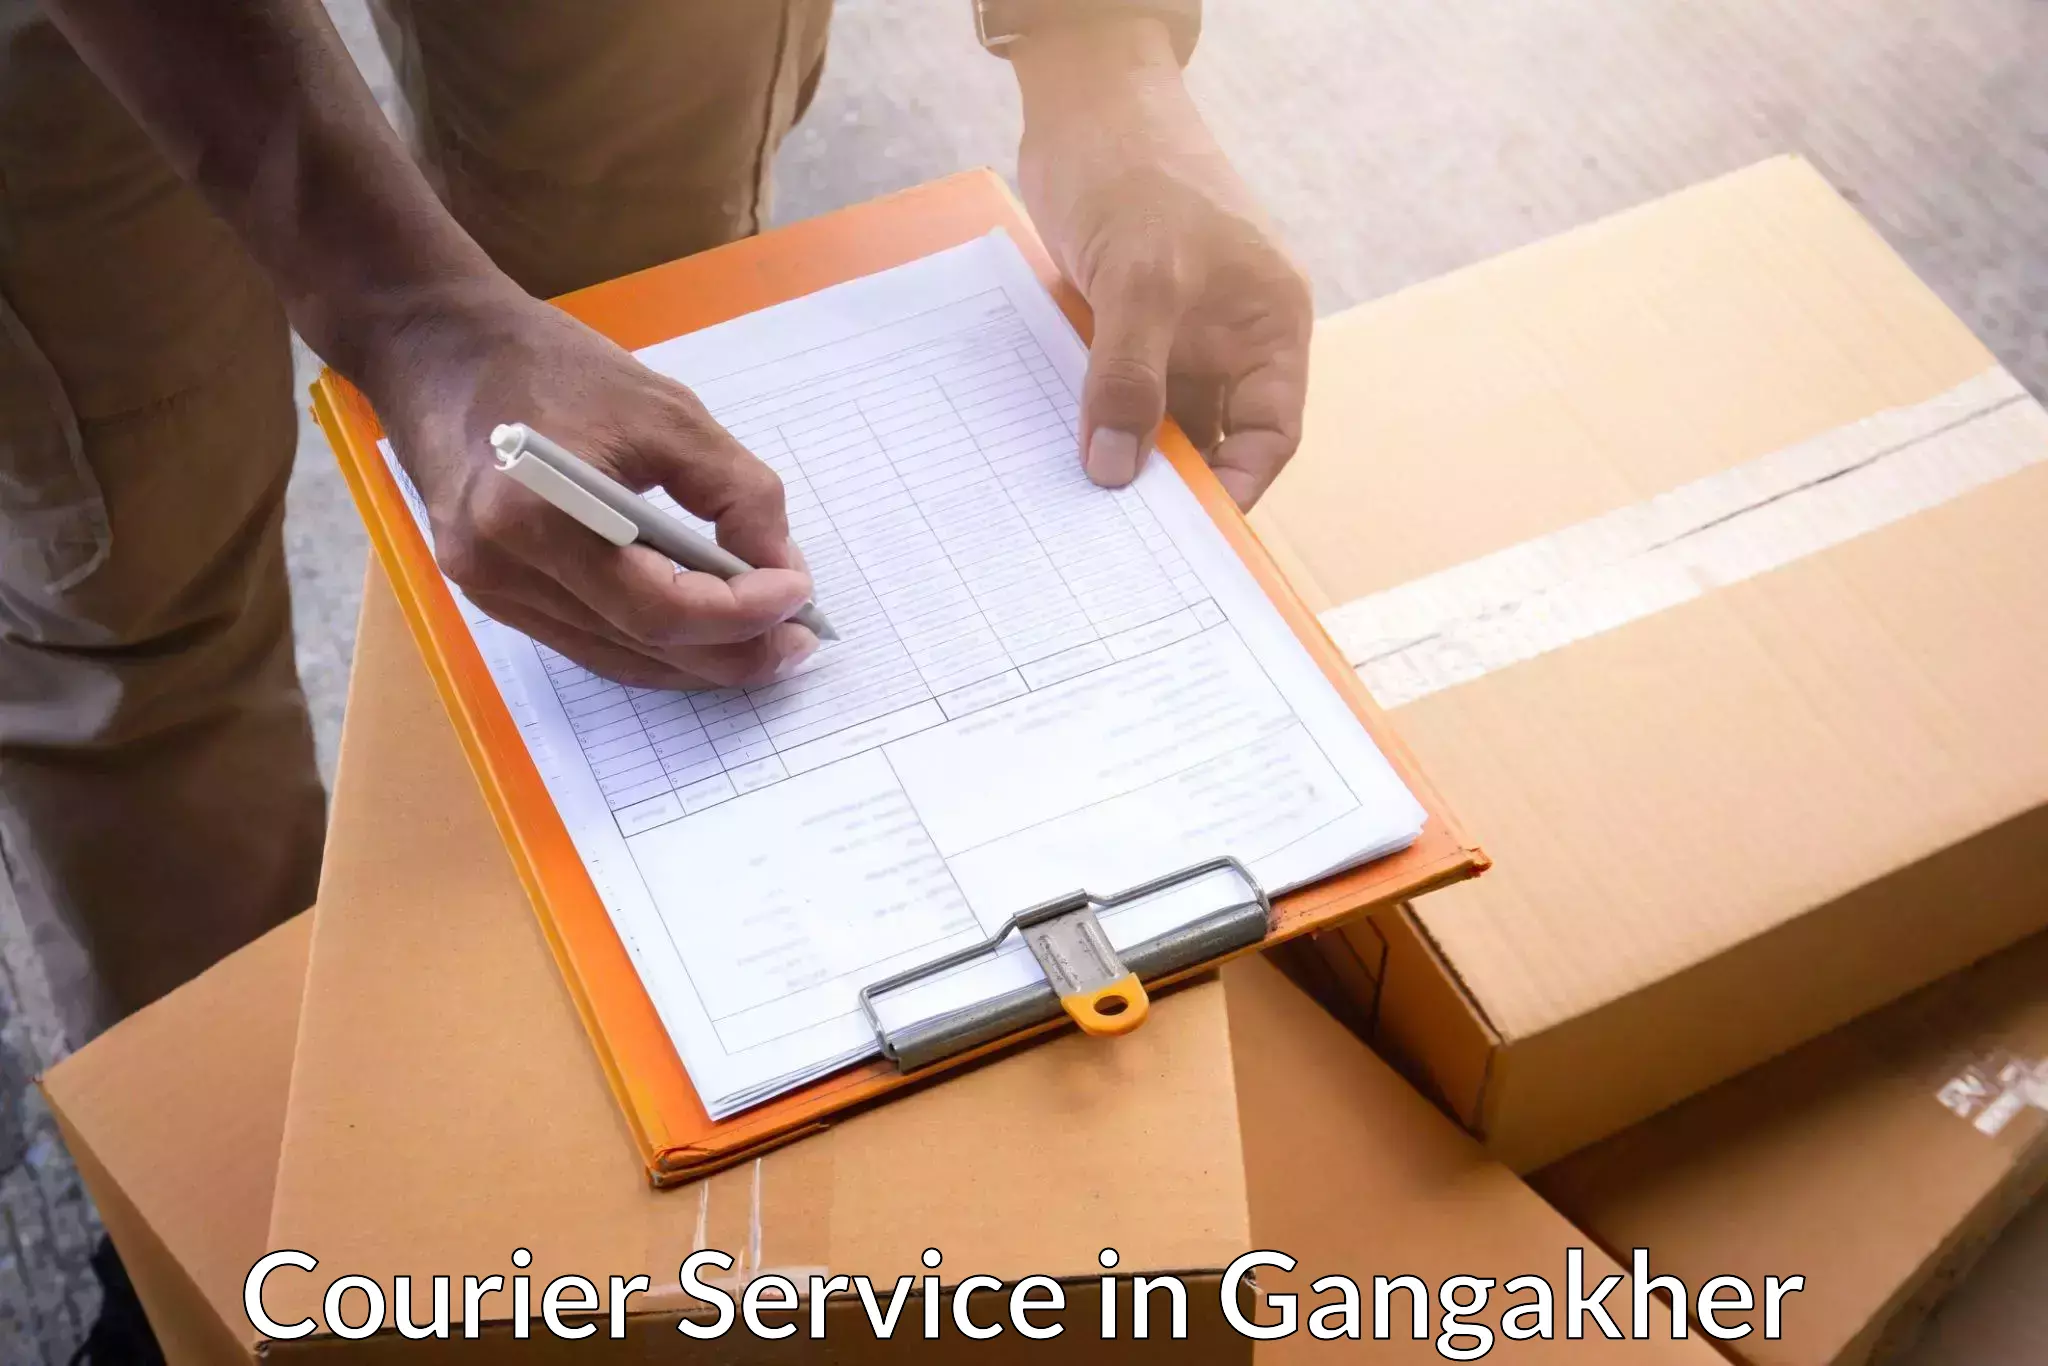 Optimized shipping services in Gangakher